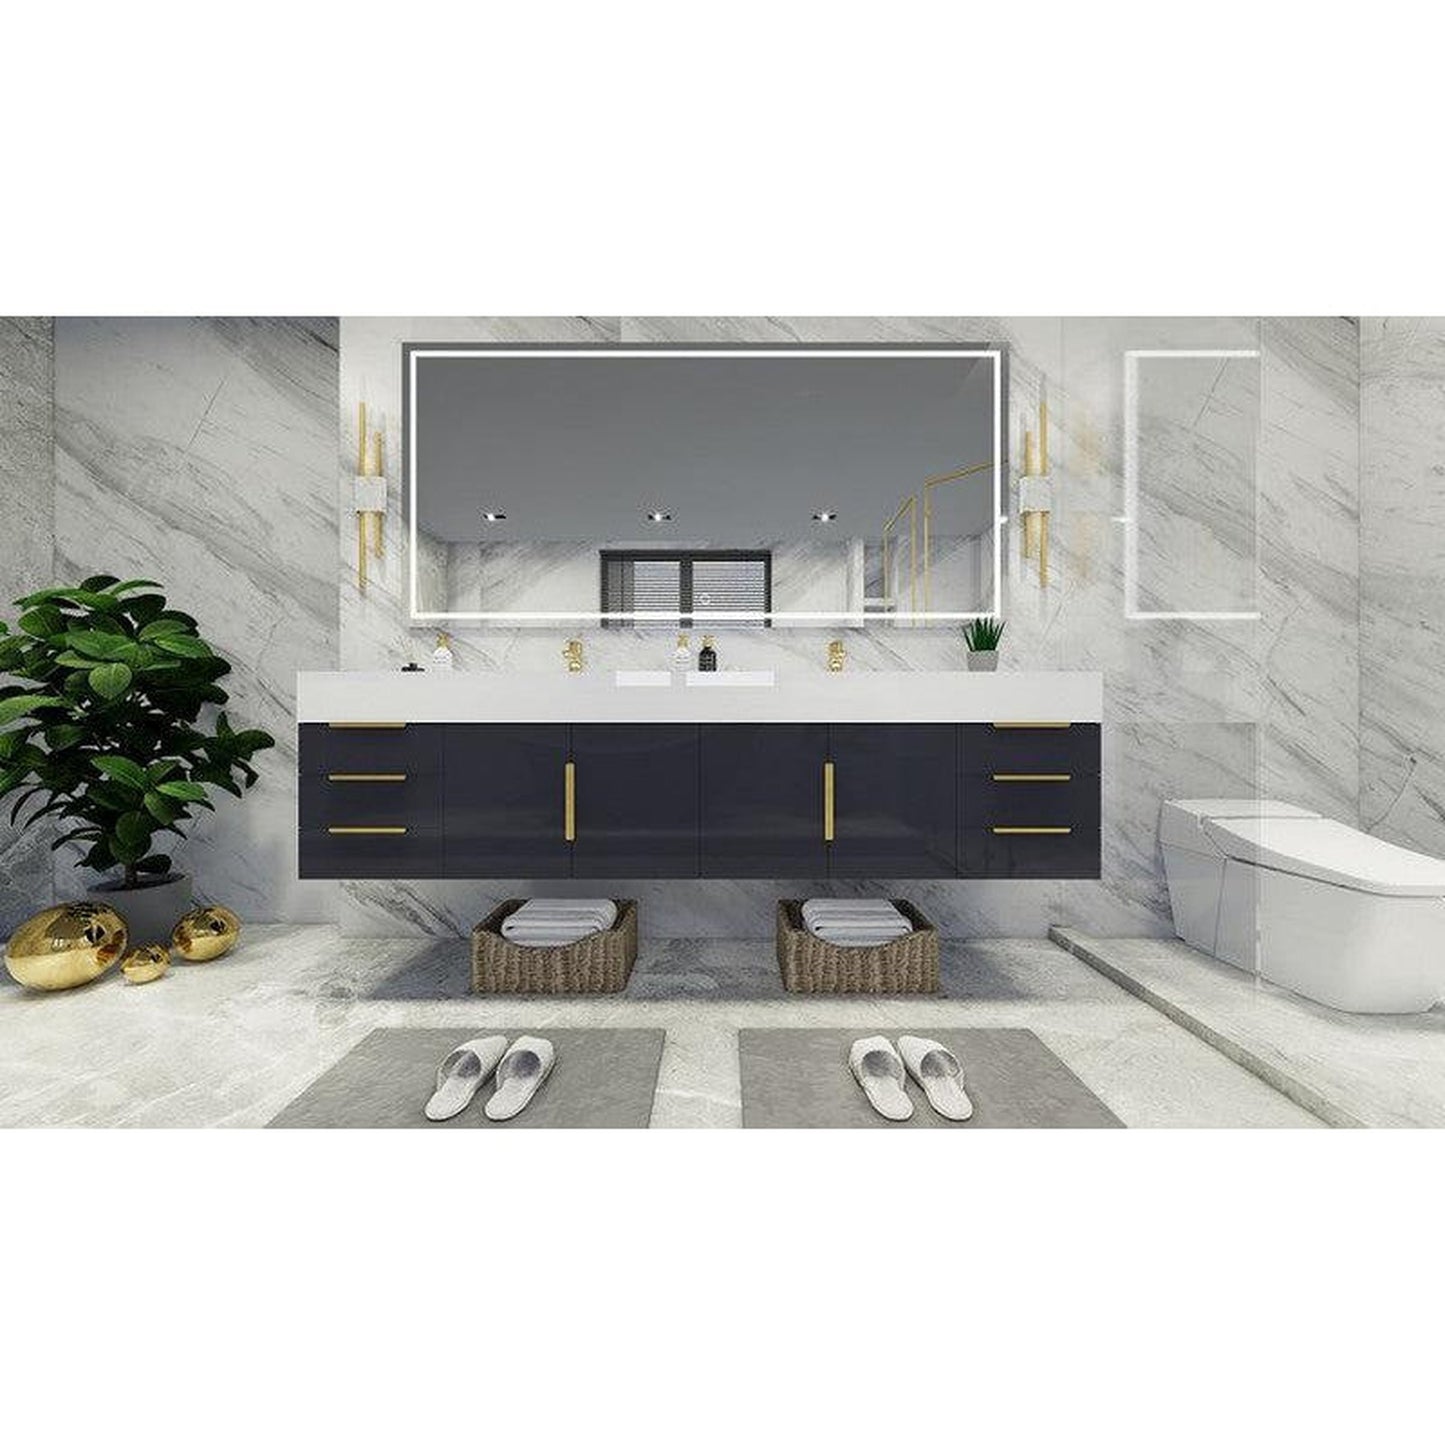 Moreno Bath Bethany 84" High Gloss Gray Wall-Mounted Vanity With Double Reinforced White Acrylic Sinks